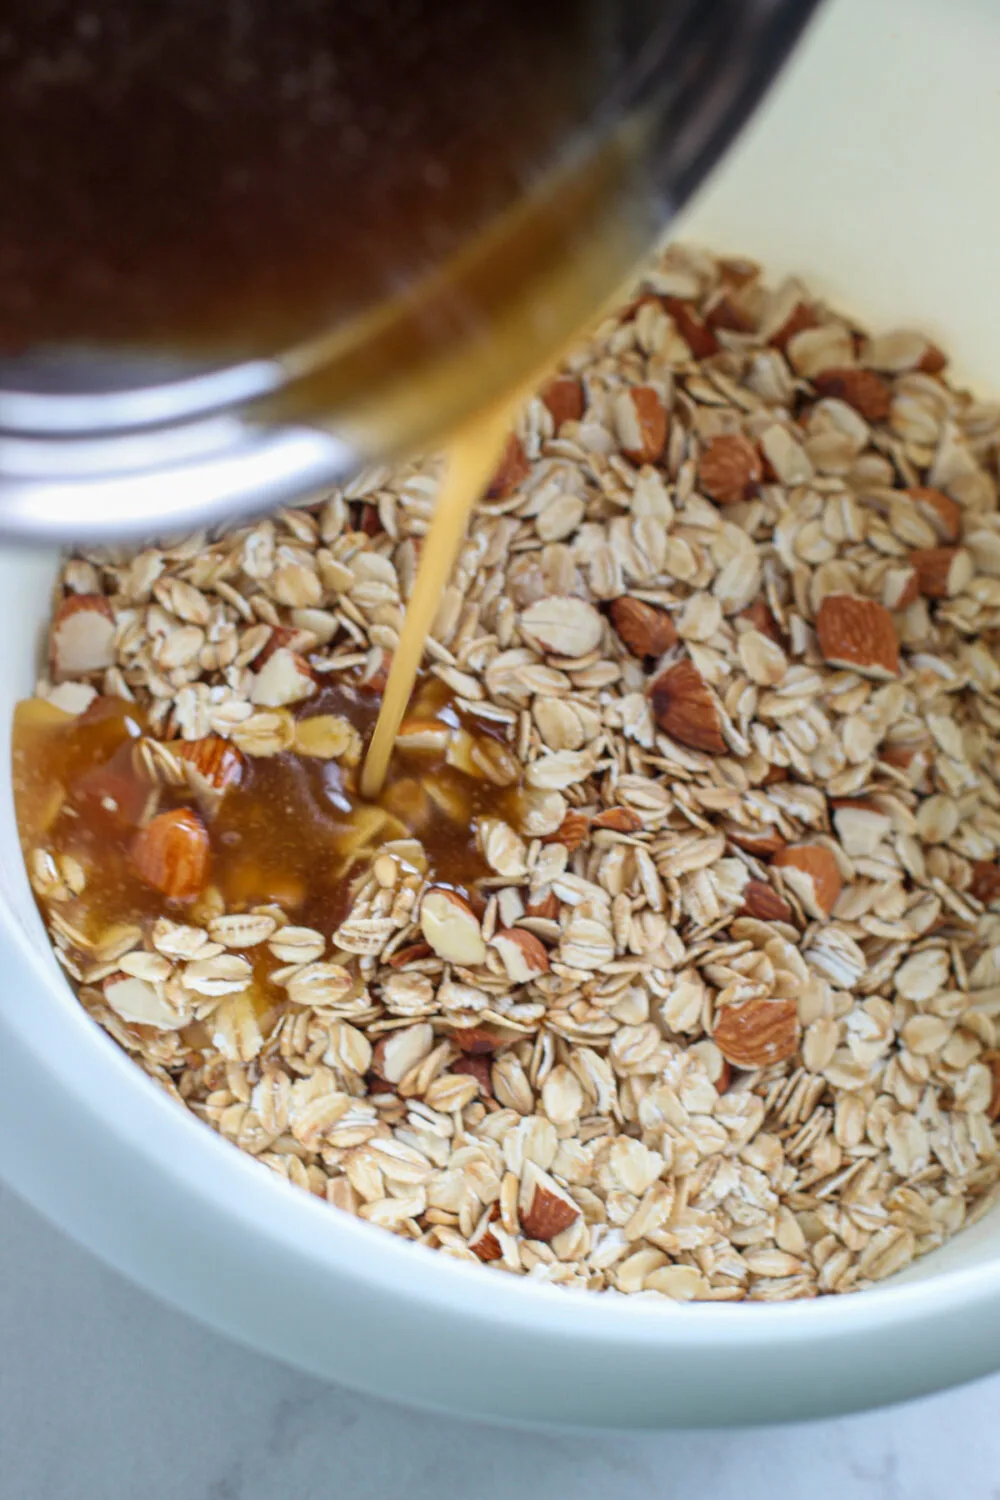 Pouring melted brown sugar on top of oats. 